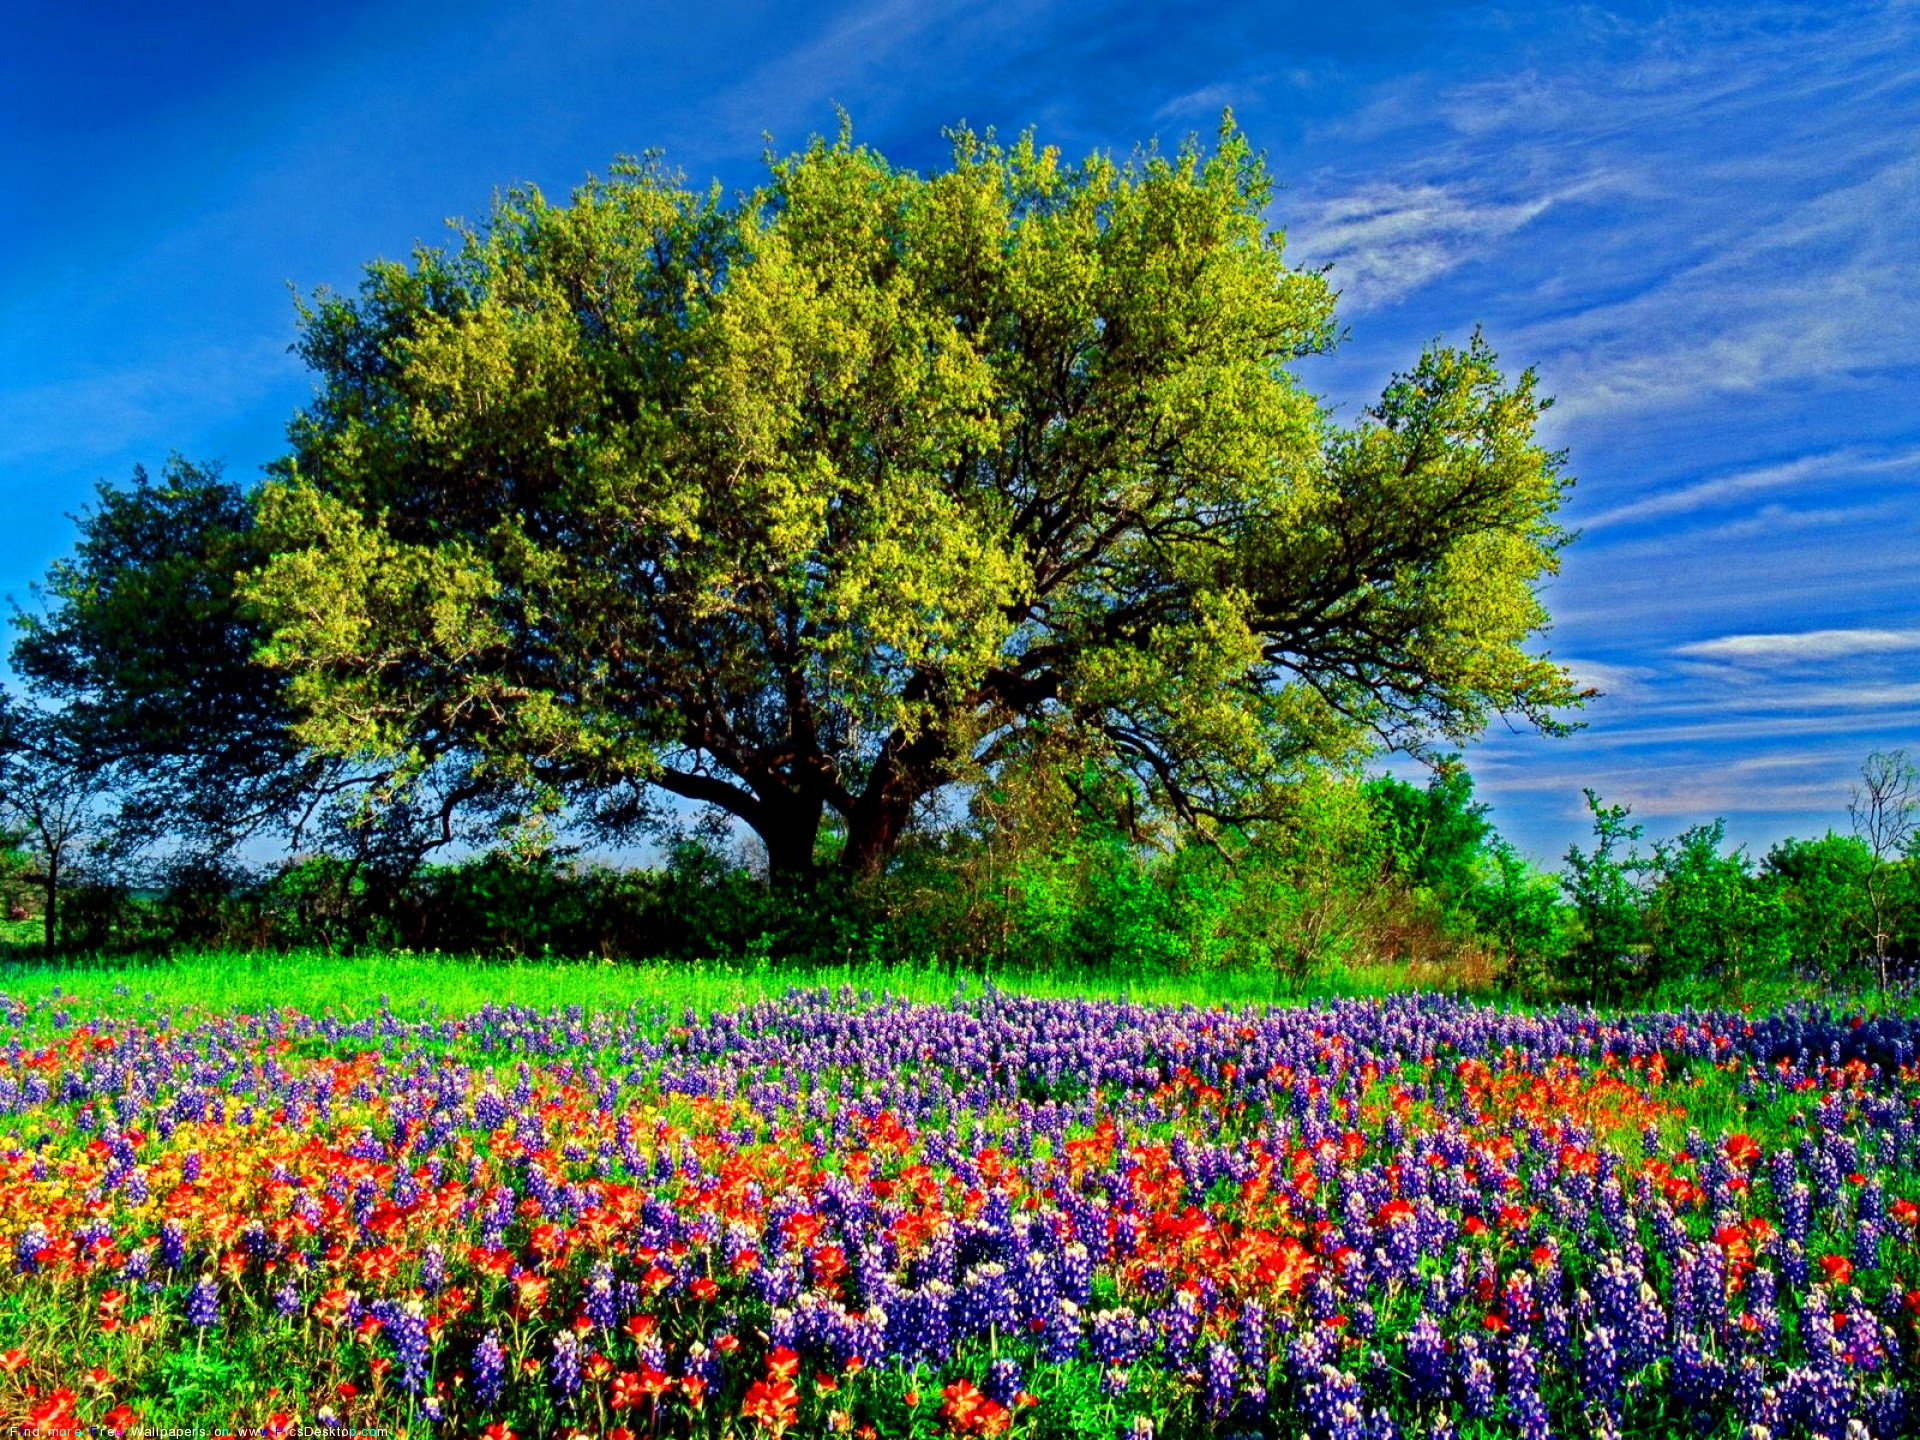 1920x1440 Live Oak, Paintbrush, and Bluebonnets in Texas Hill Country, USA  Photographic Print by Adam Jones